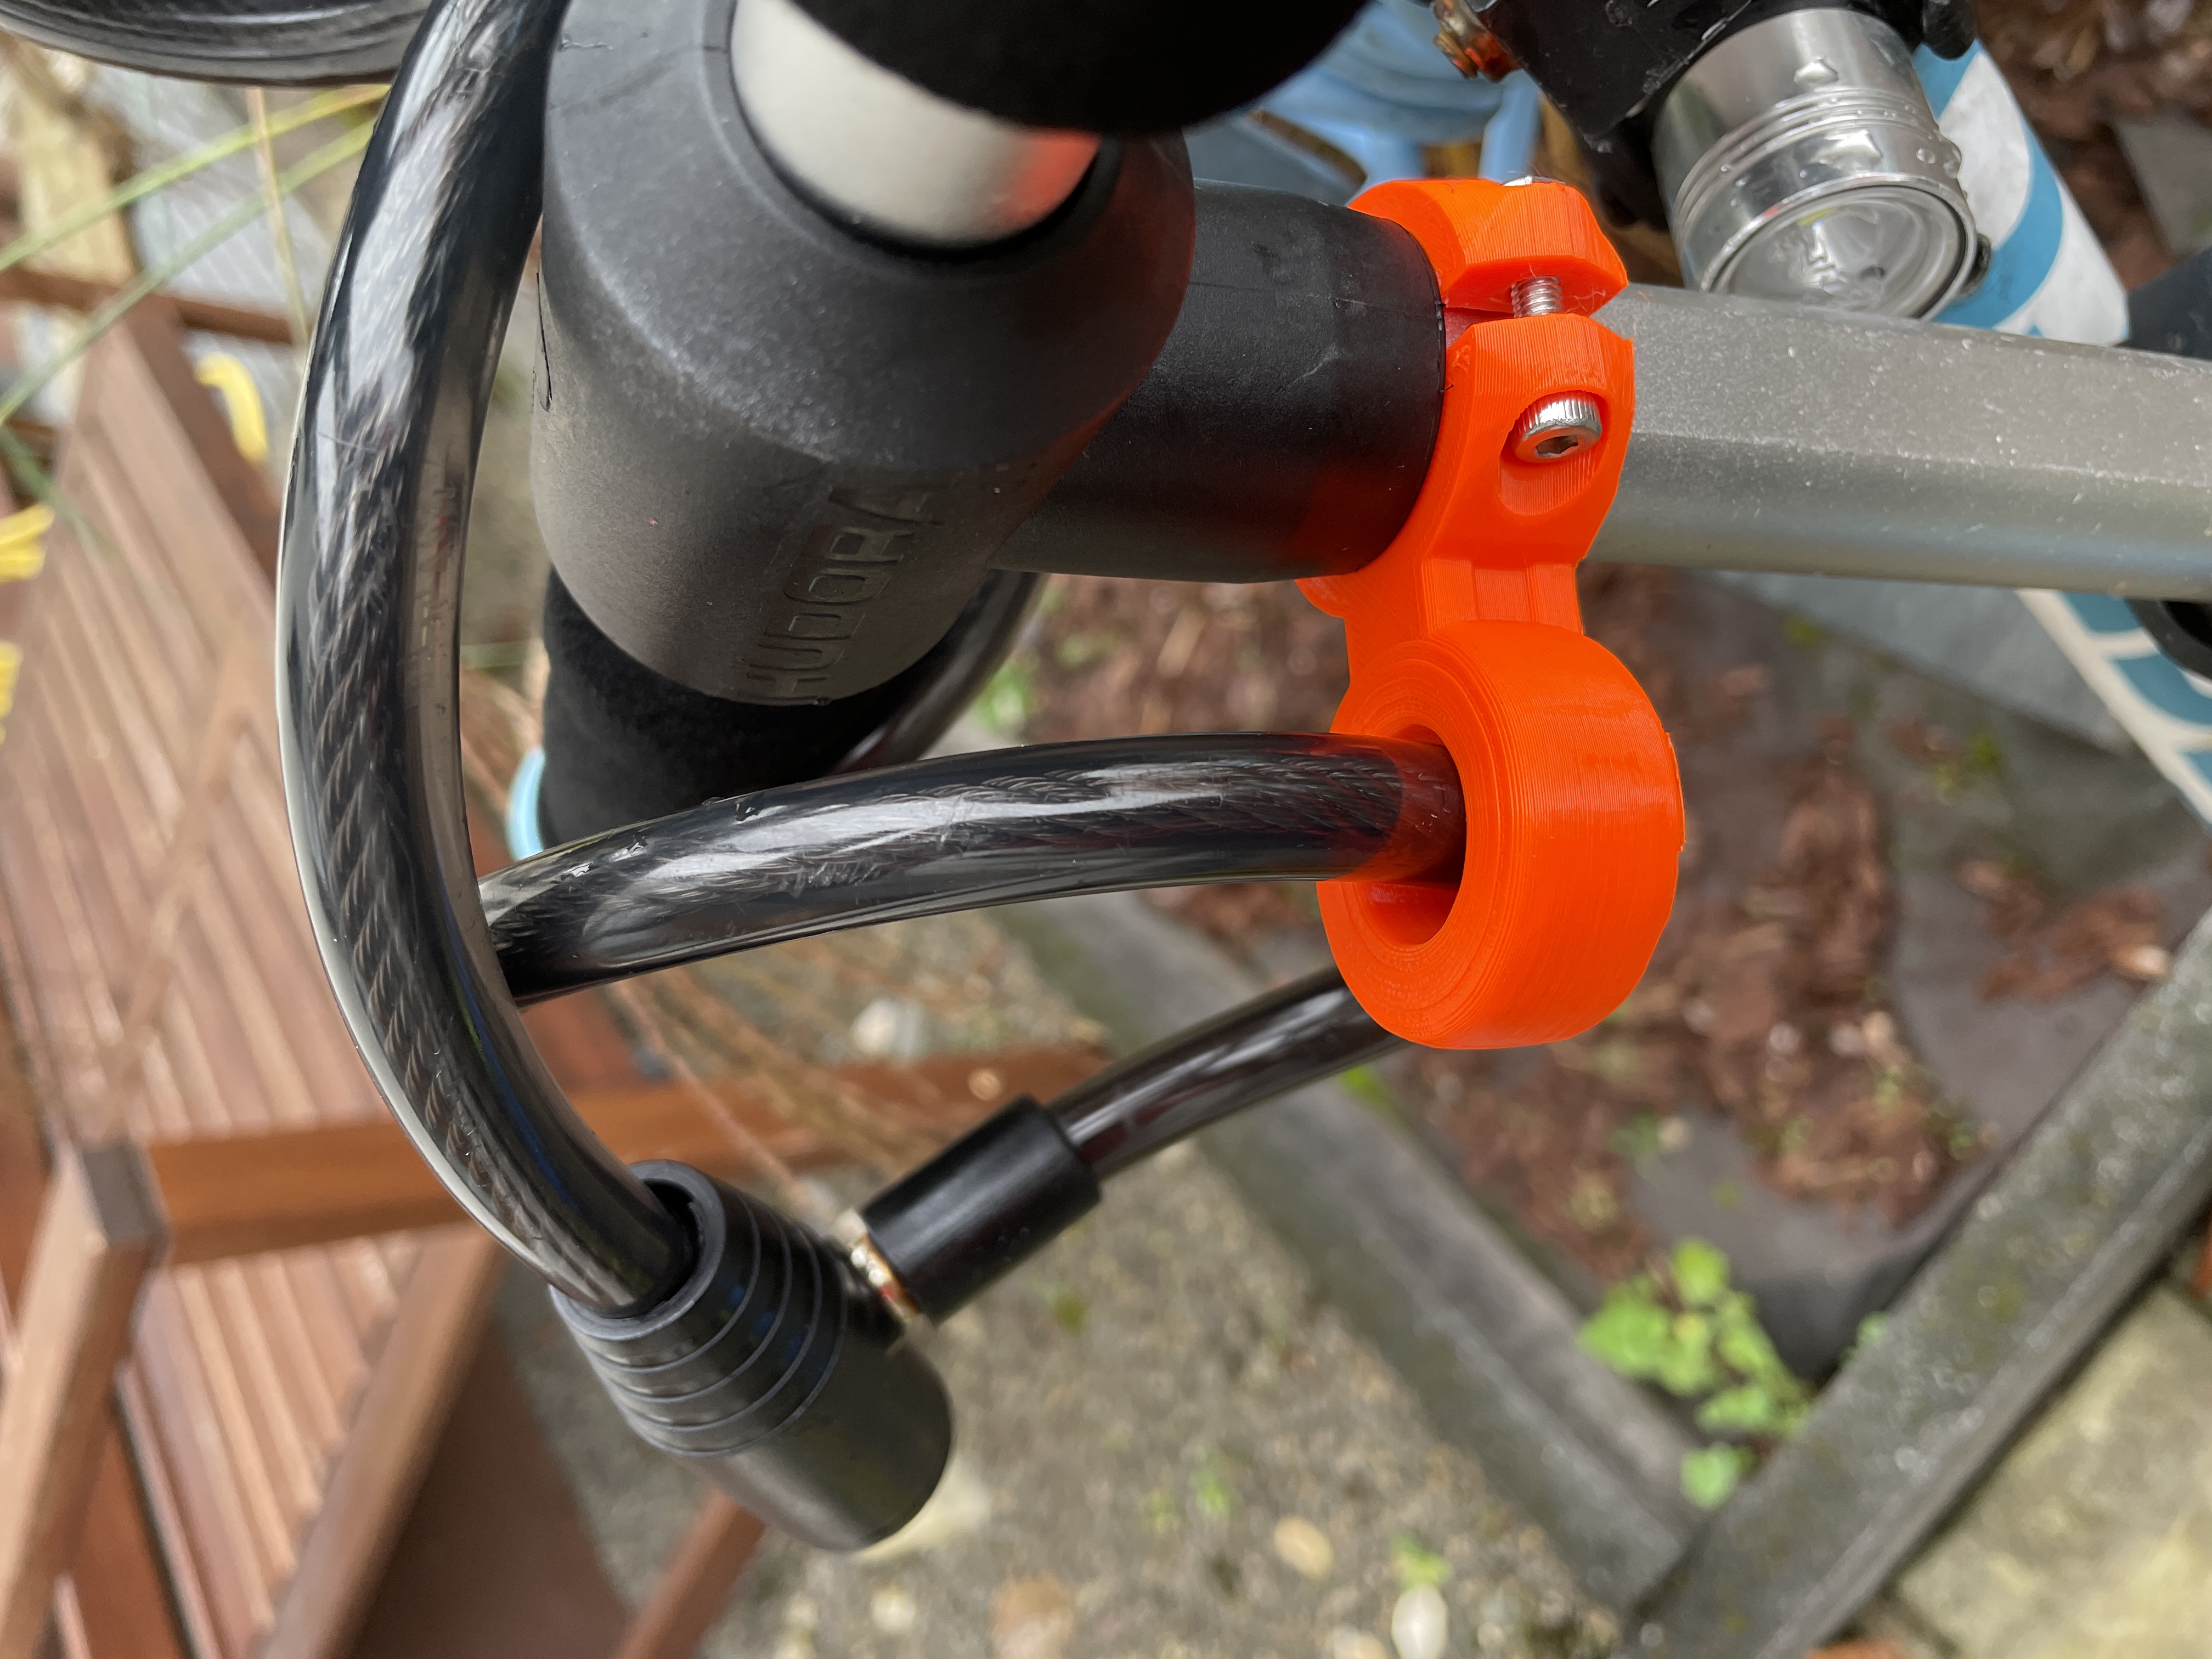 Mount for scooter lock on a 25mm pipe handle